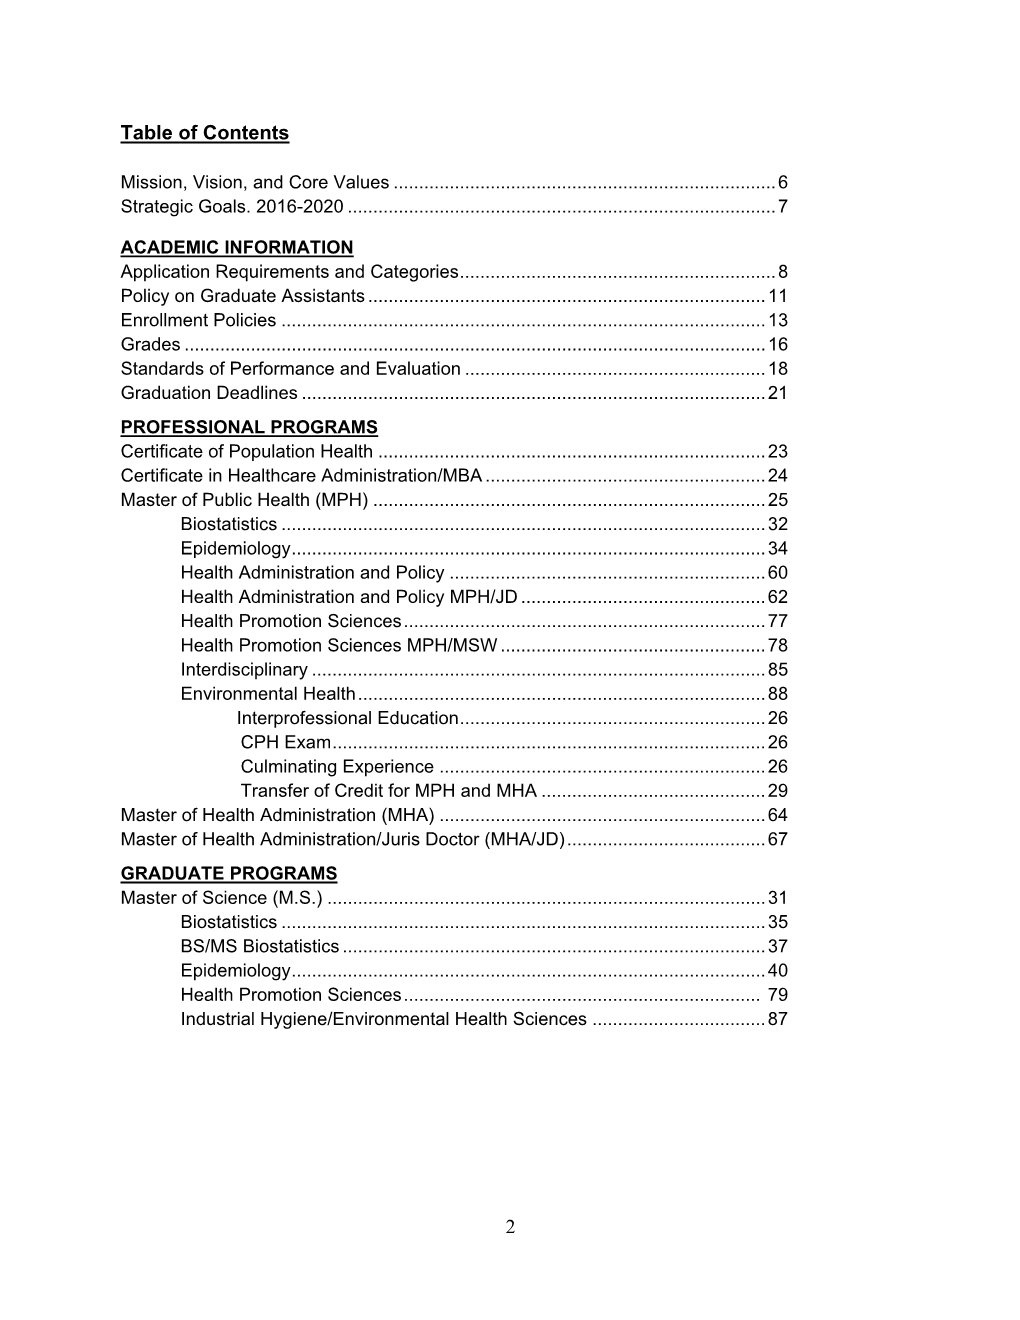 2 Table of Contents